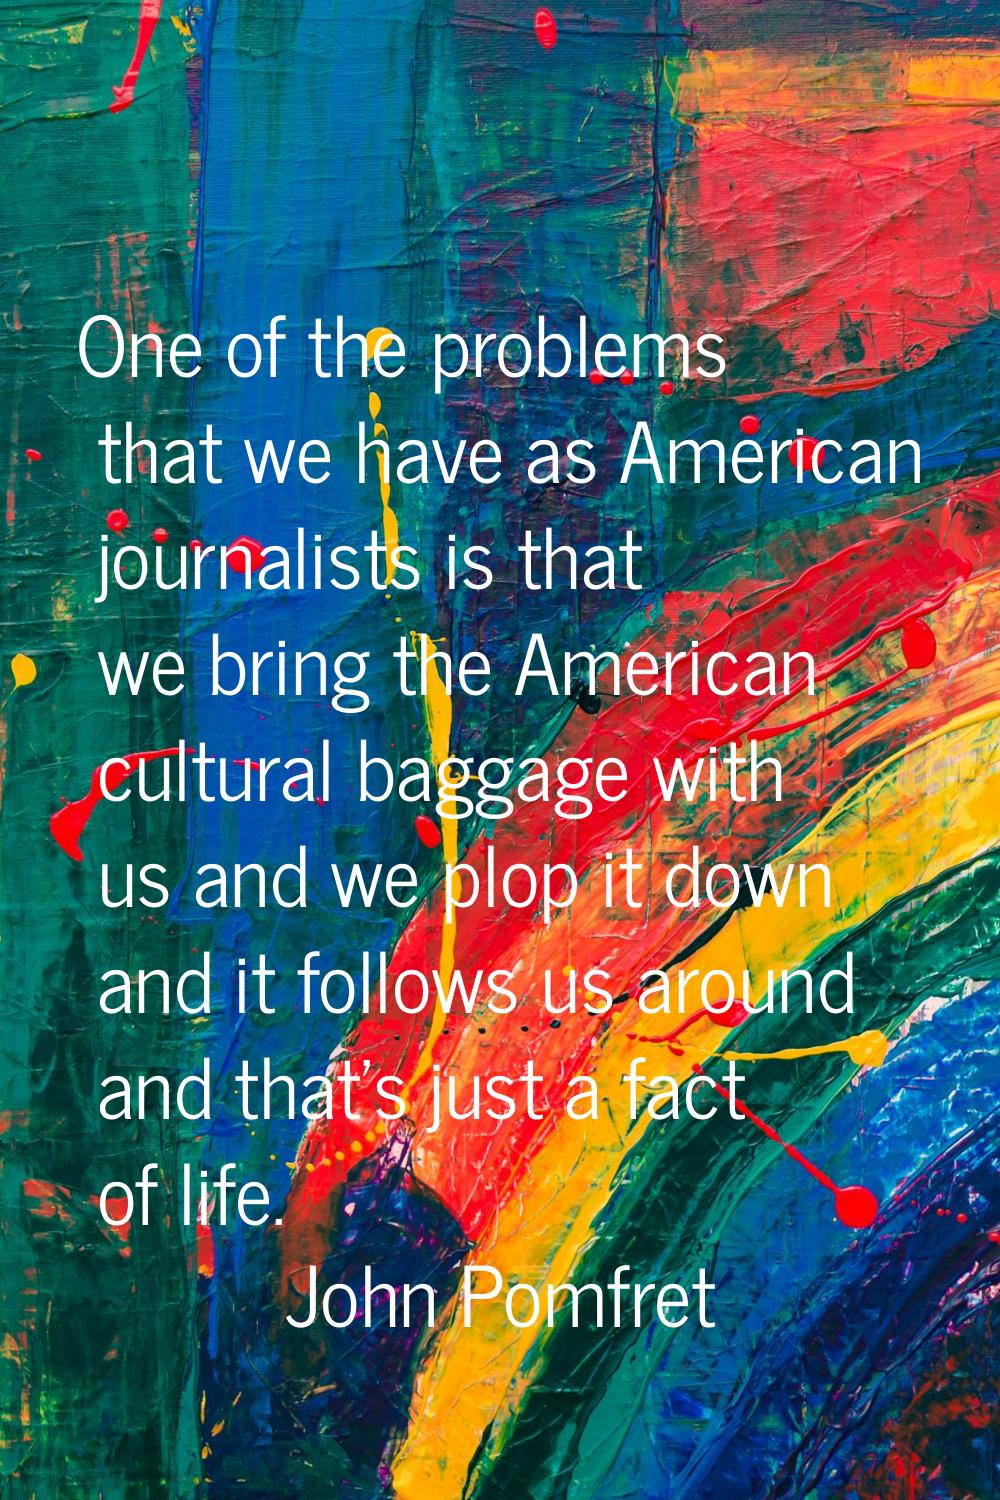 One of the problems that we have as American journalists is that we bring the American cultural bag